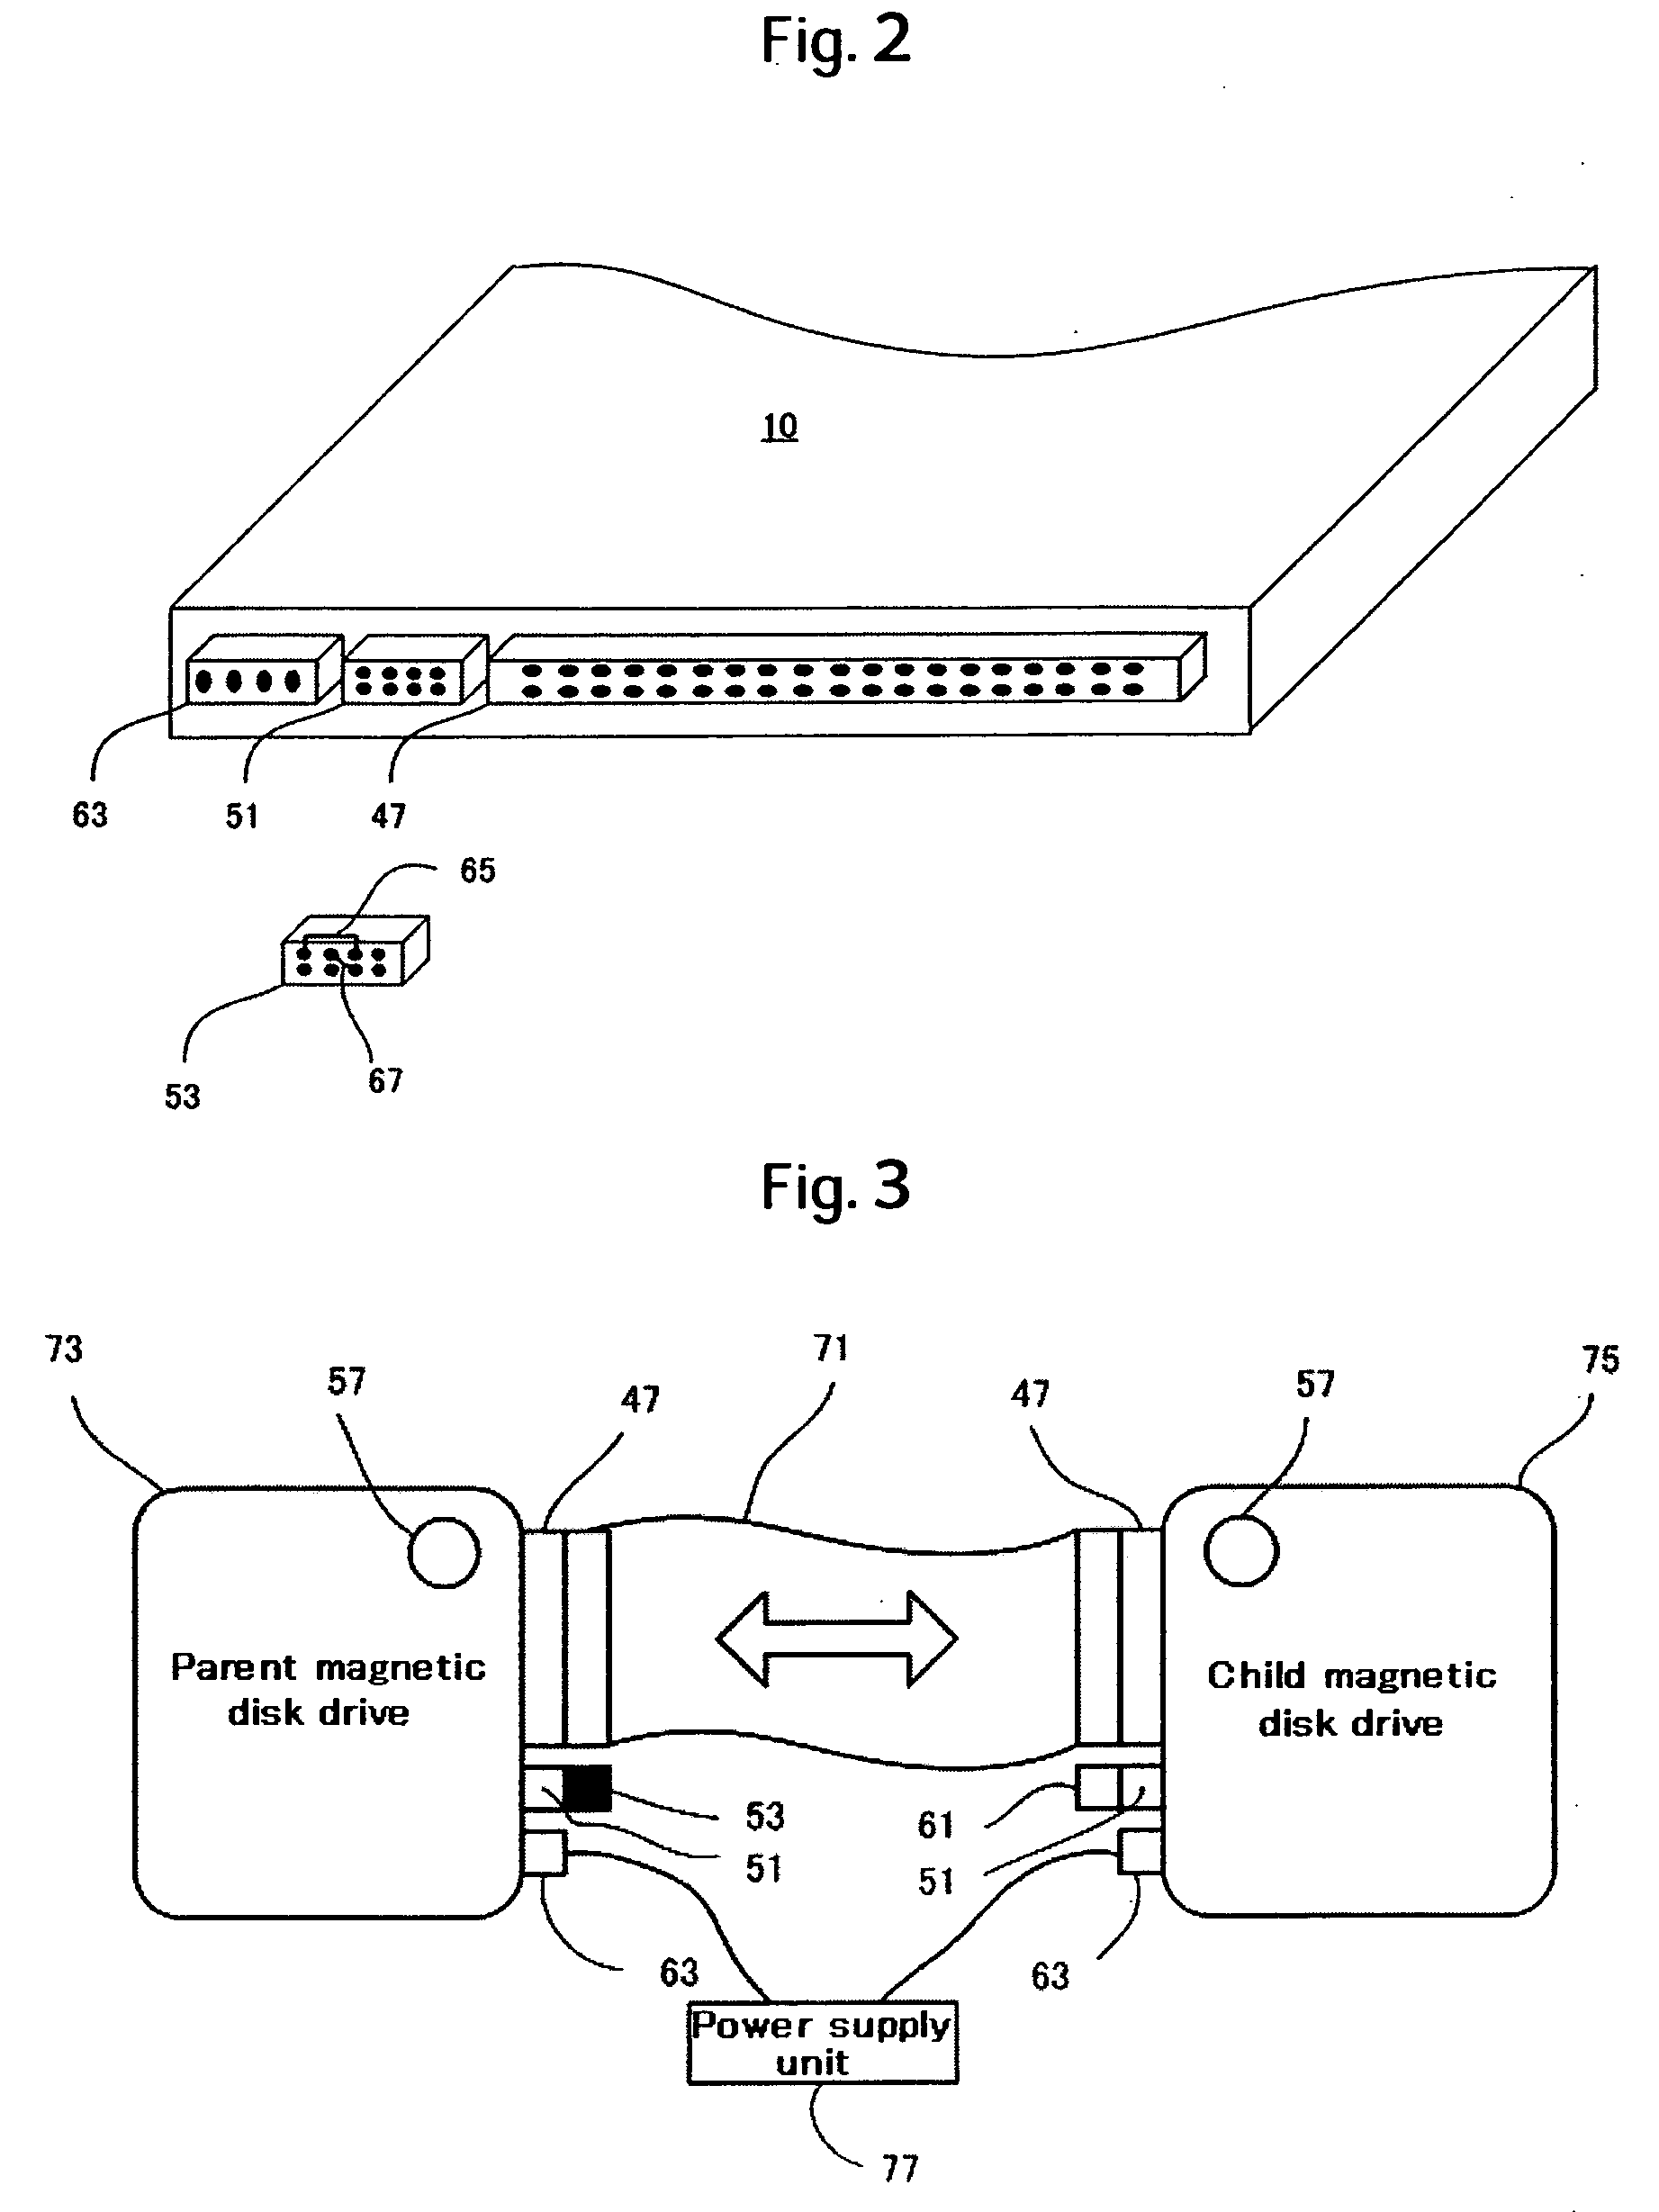 Magnetic disk drive manufacturing method, test/adjustment apparatus, and transport container